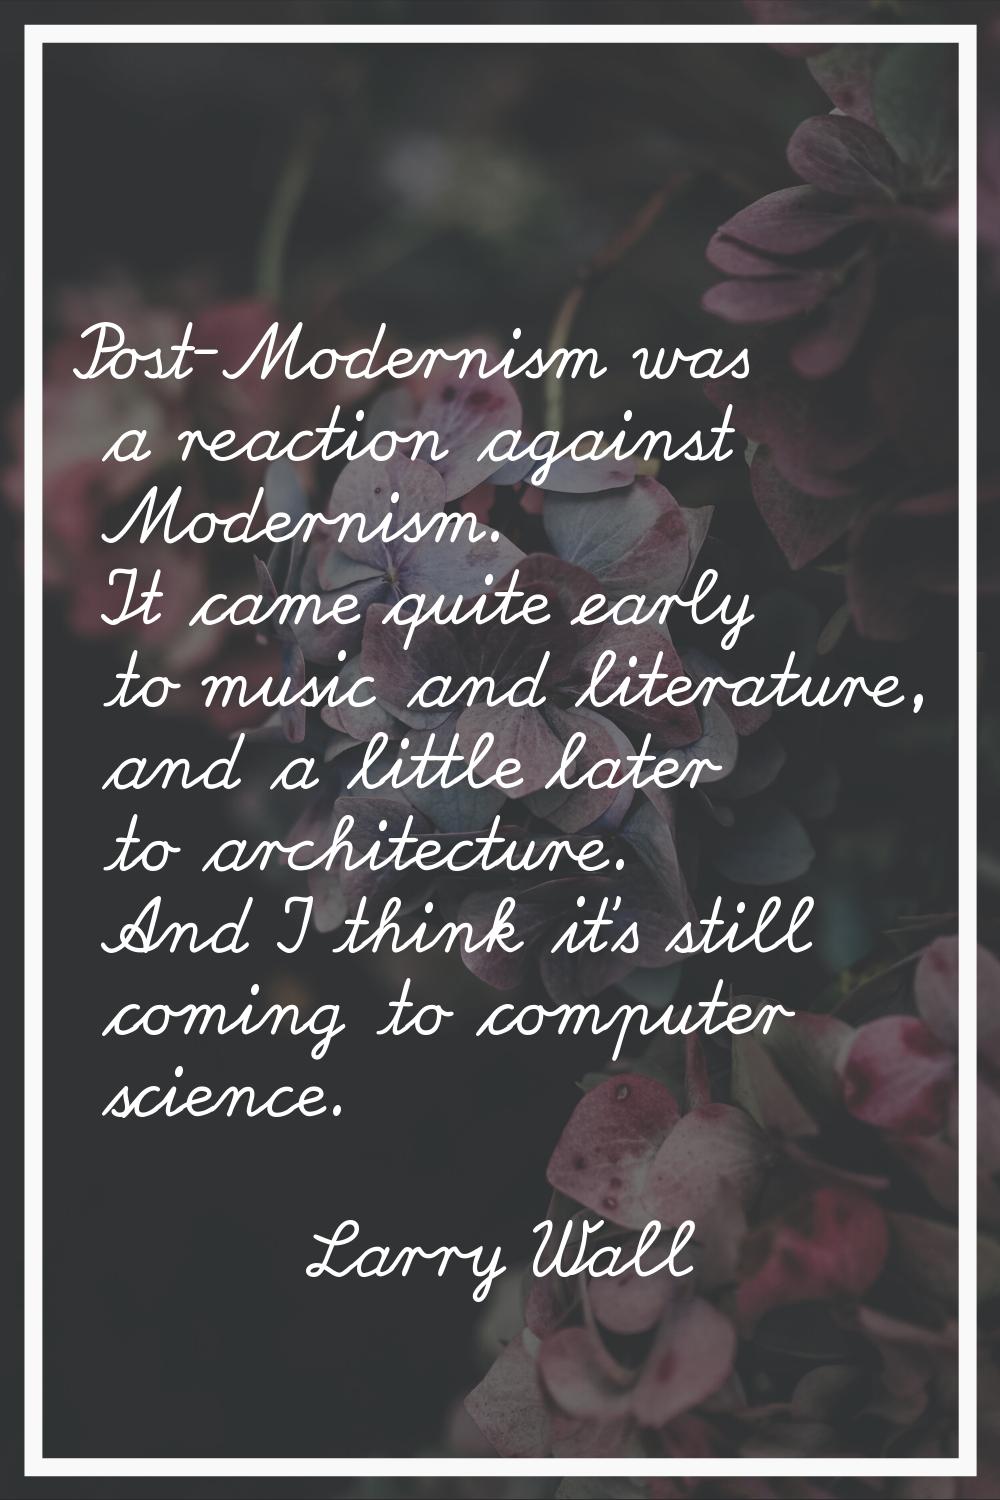 Post-Modernism was a reaction against Modernism. It came quite early to music and literature, and a